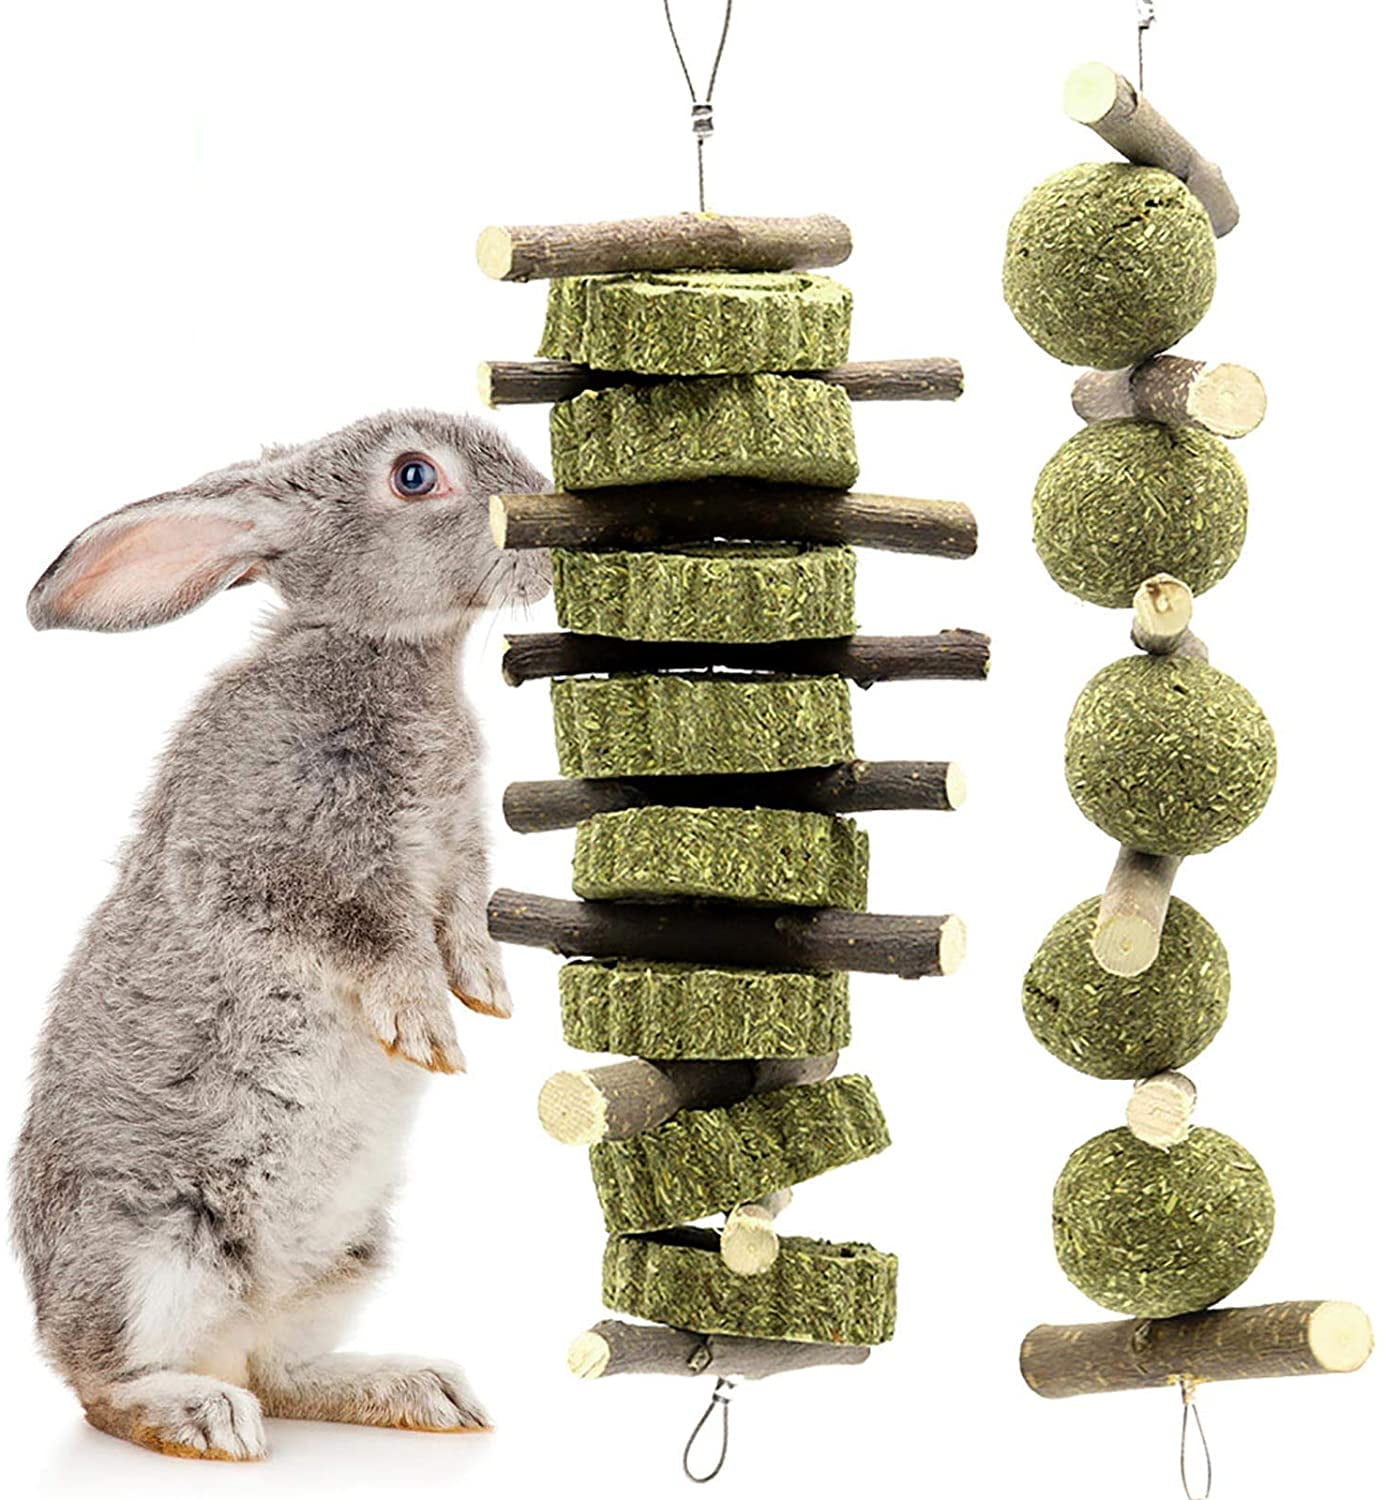 Chinchilla Lurowo Teeth Grinding Toy Natural Chew Toys Organic Apple Wooden Sticks with Grass Cake and with Grass Ball for Rabbits Hamsters and Other Small Animals